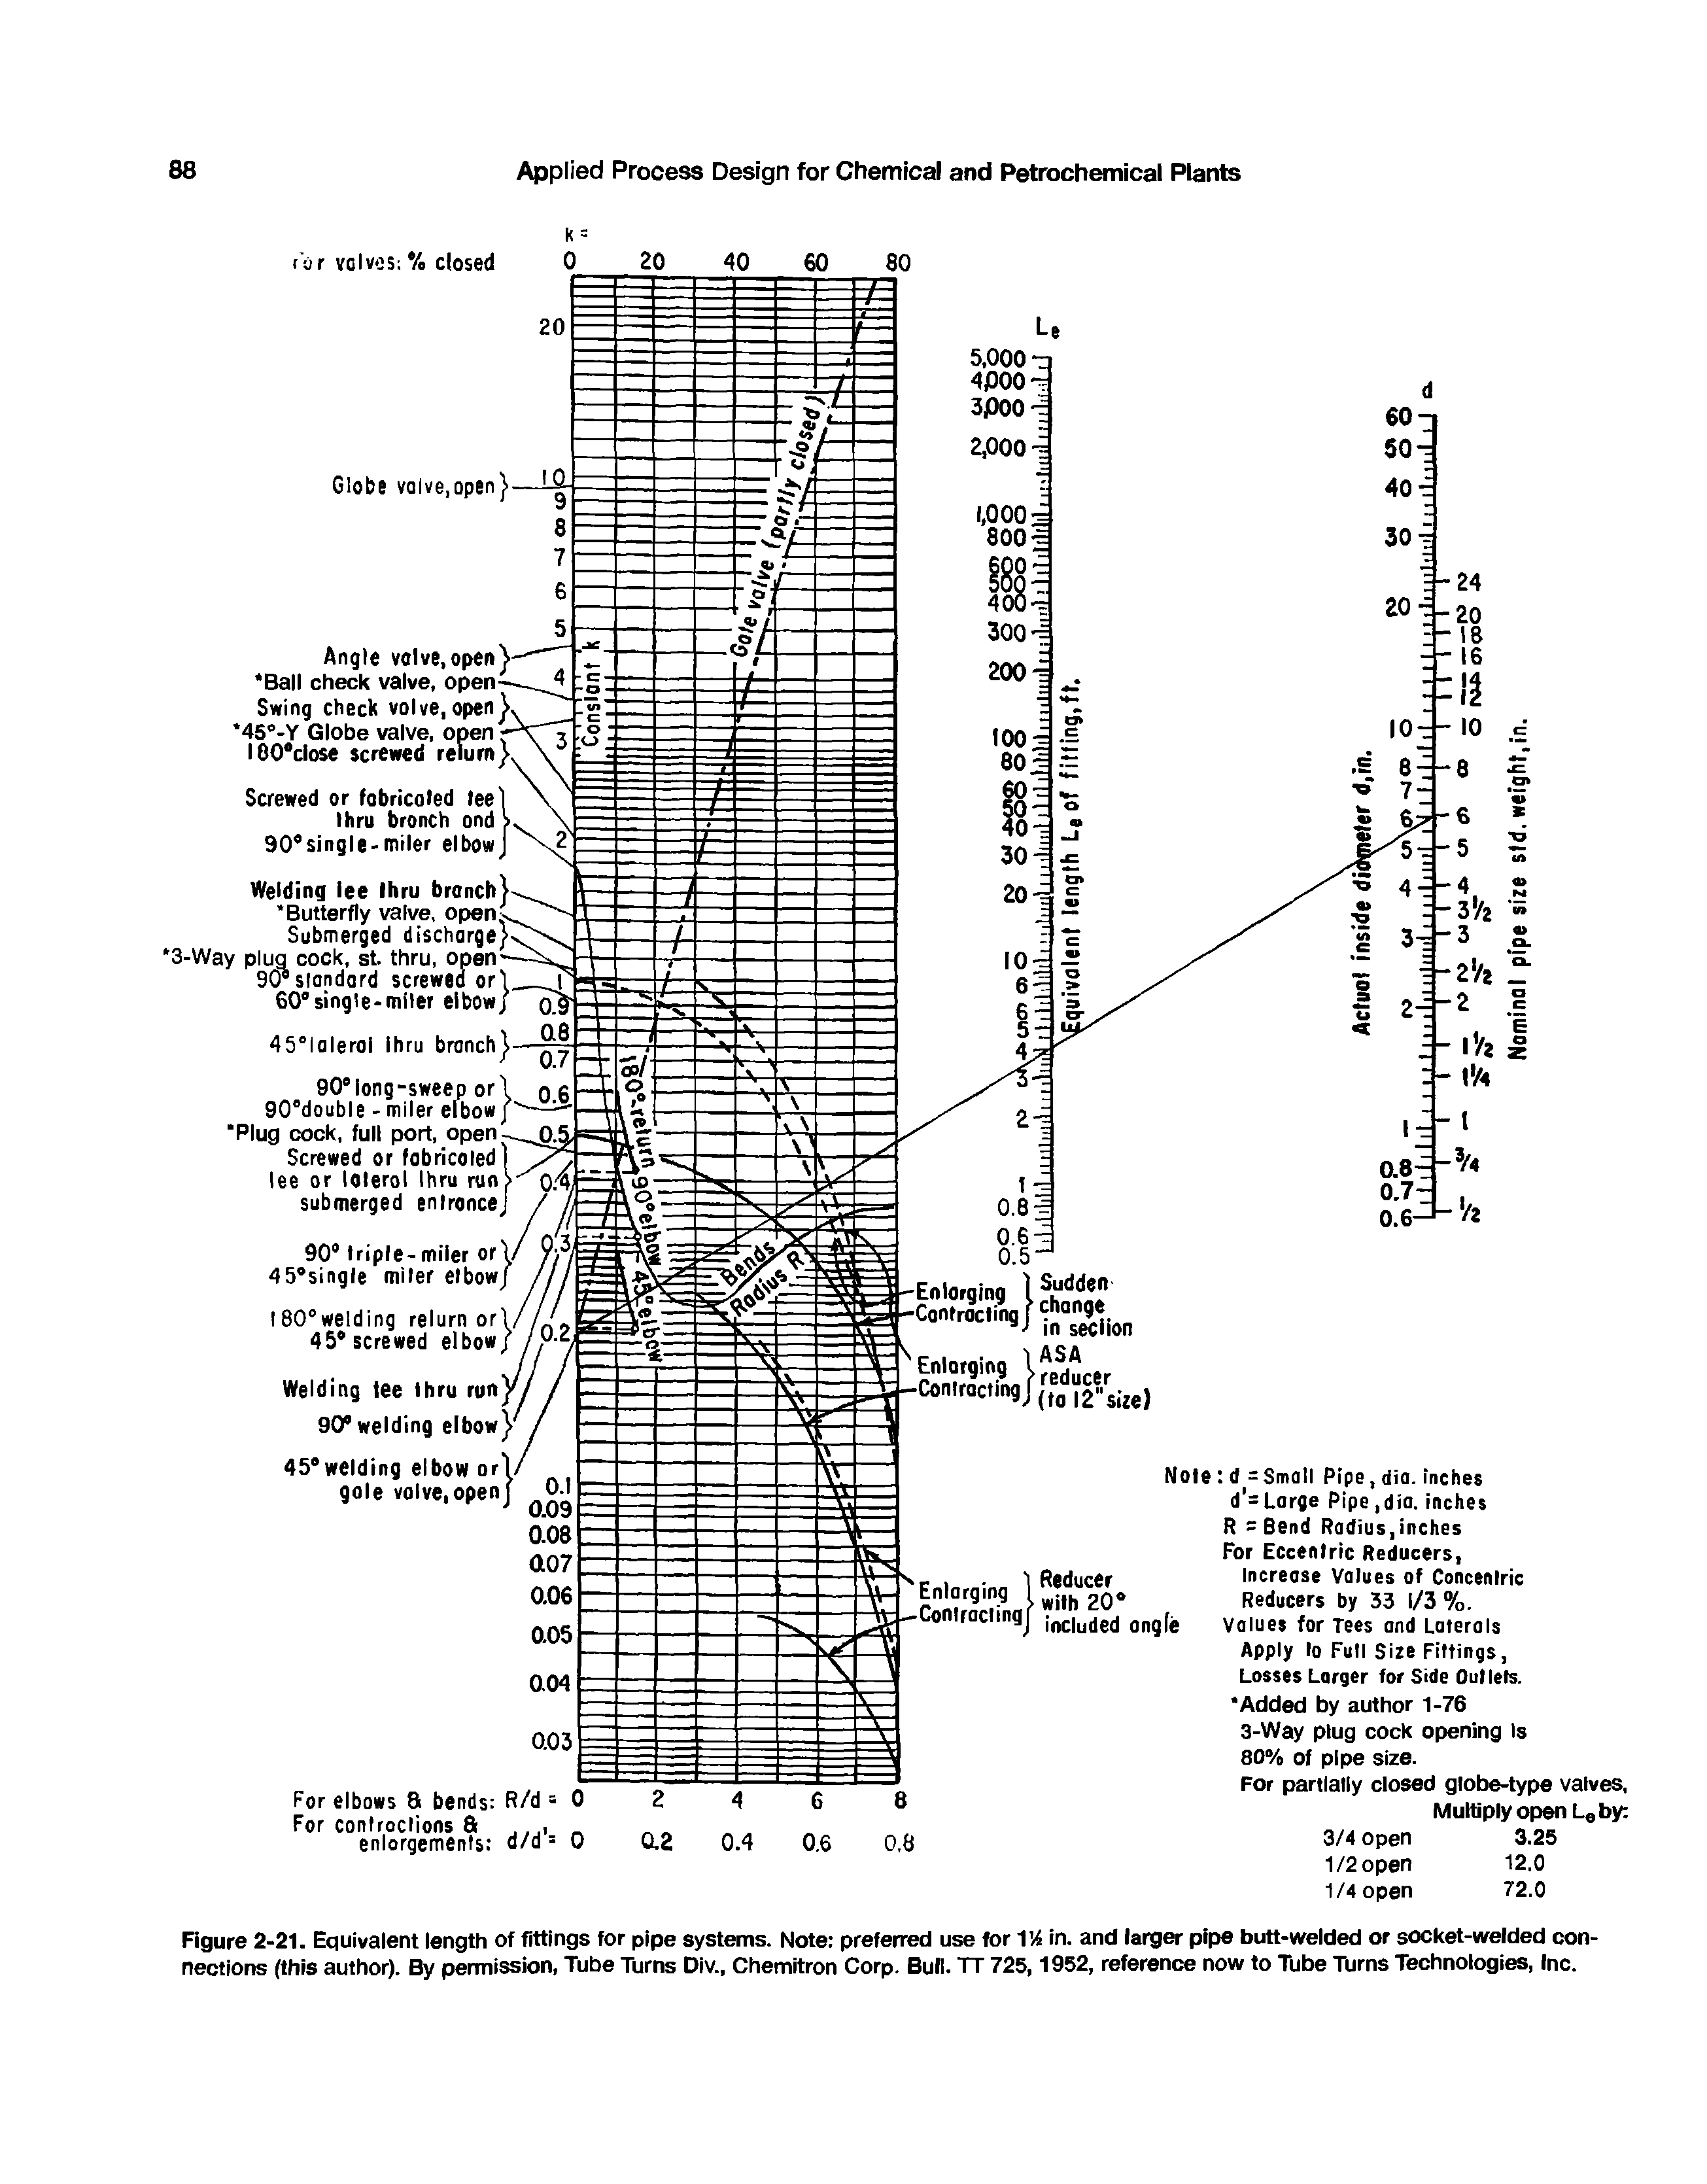 Figure 2-21. Equivalent length of fittings for pipe systems. Note preferred use for VA in. and larger pipe butt-welded or socket-welded connections (this author). By permission, Tube Turns Div., Chemitron Corp. Bull. TT 725,1952, reference now to Tube TUrns Technologies, Inc.